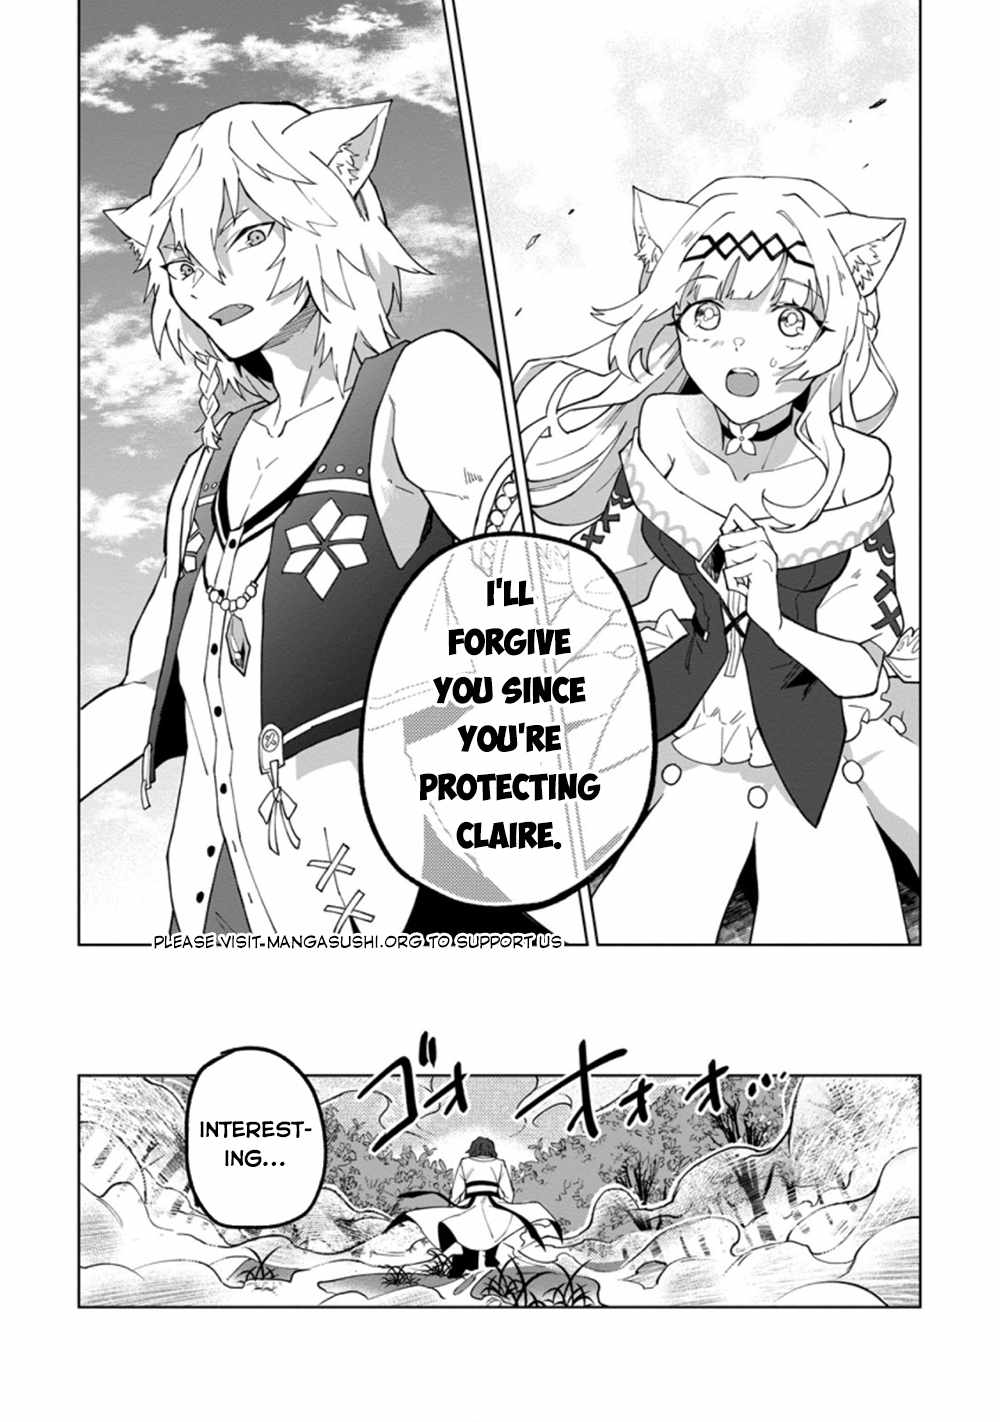 The White Mage Who Was Banished From the Hero's Party Is Picked up by an S Rank Adventurer ~ This White Mage Is Too Out of the Ordinary! Chapter 16-2-eng-li - Page 7